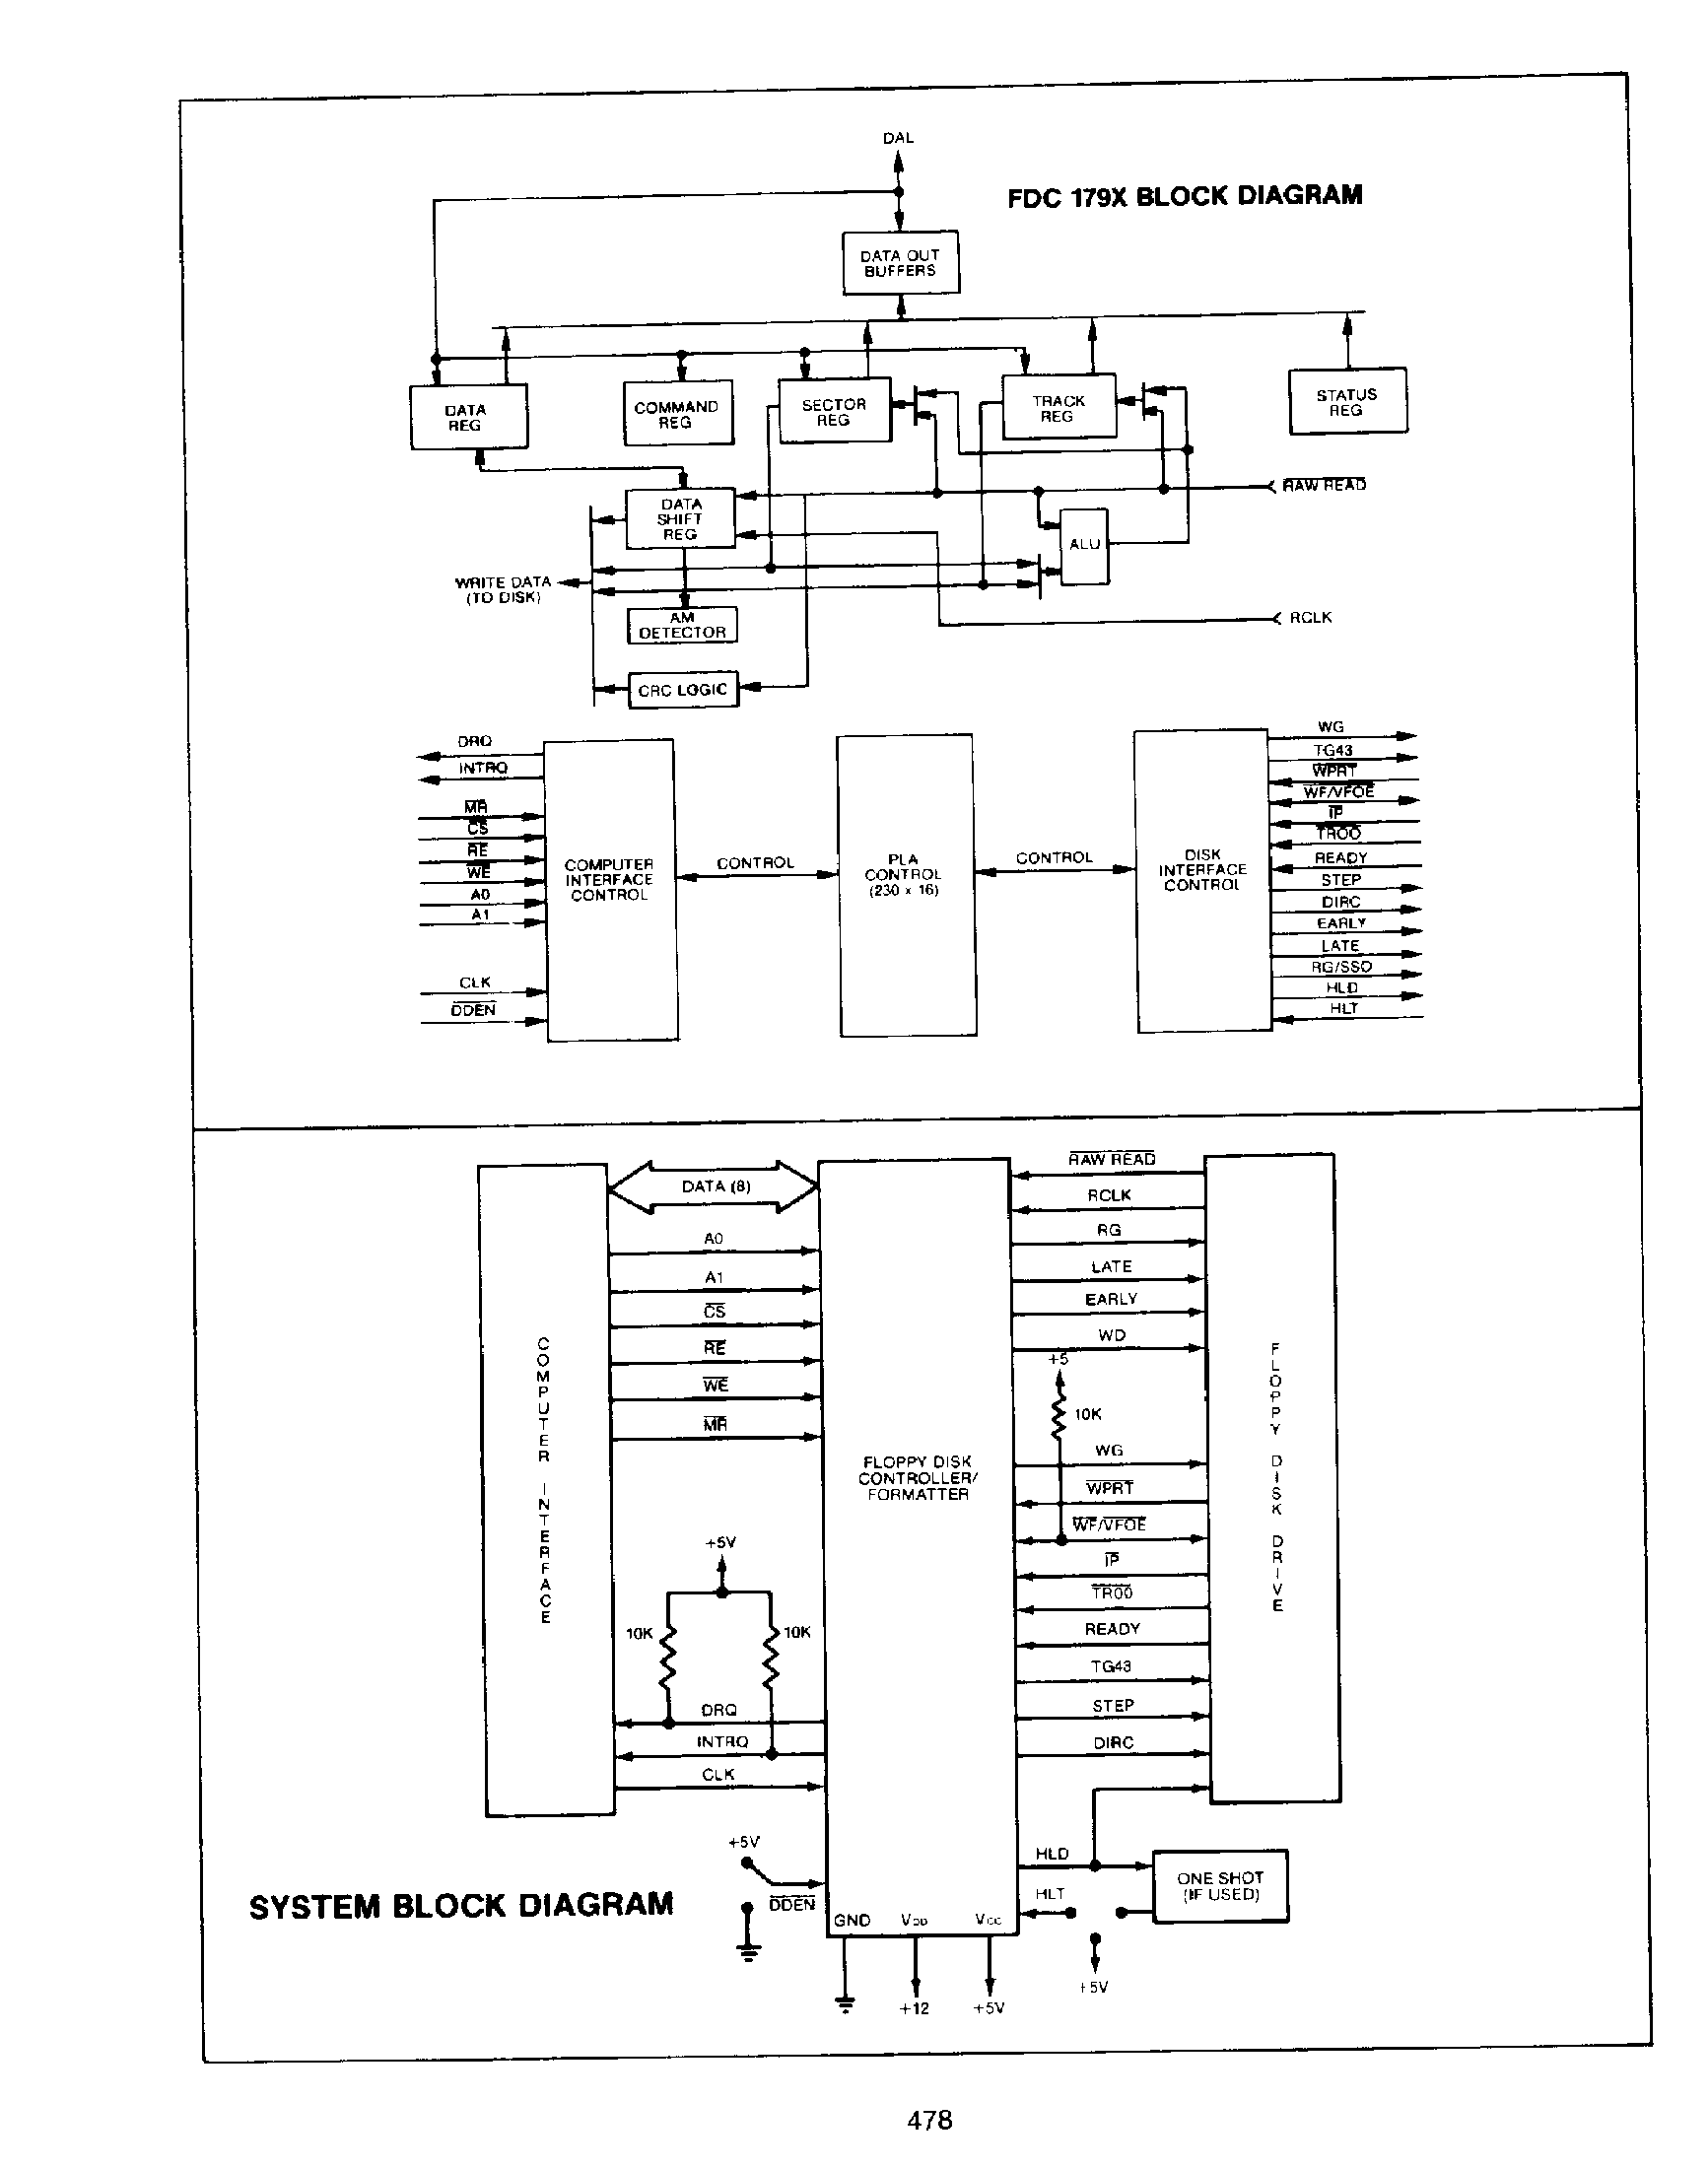 Datasheet FDC1791-02 - (FDC179x-02) Floppy Disk Controller / Formatter FDC page 2